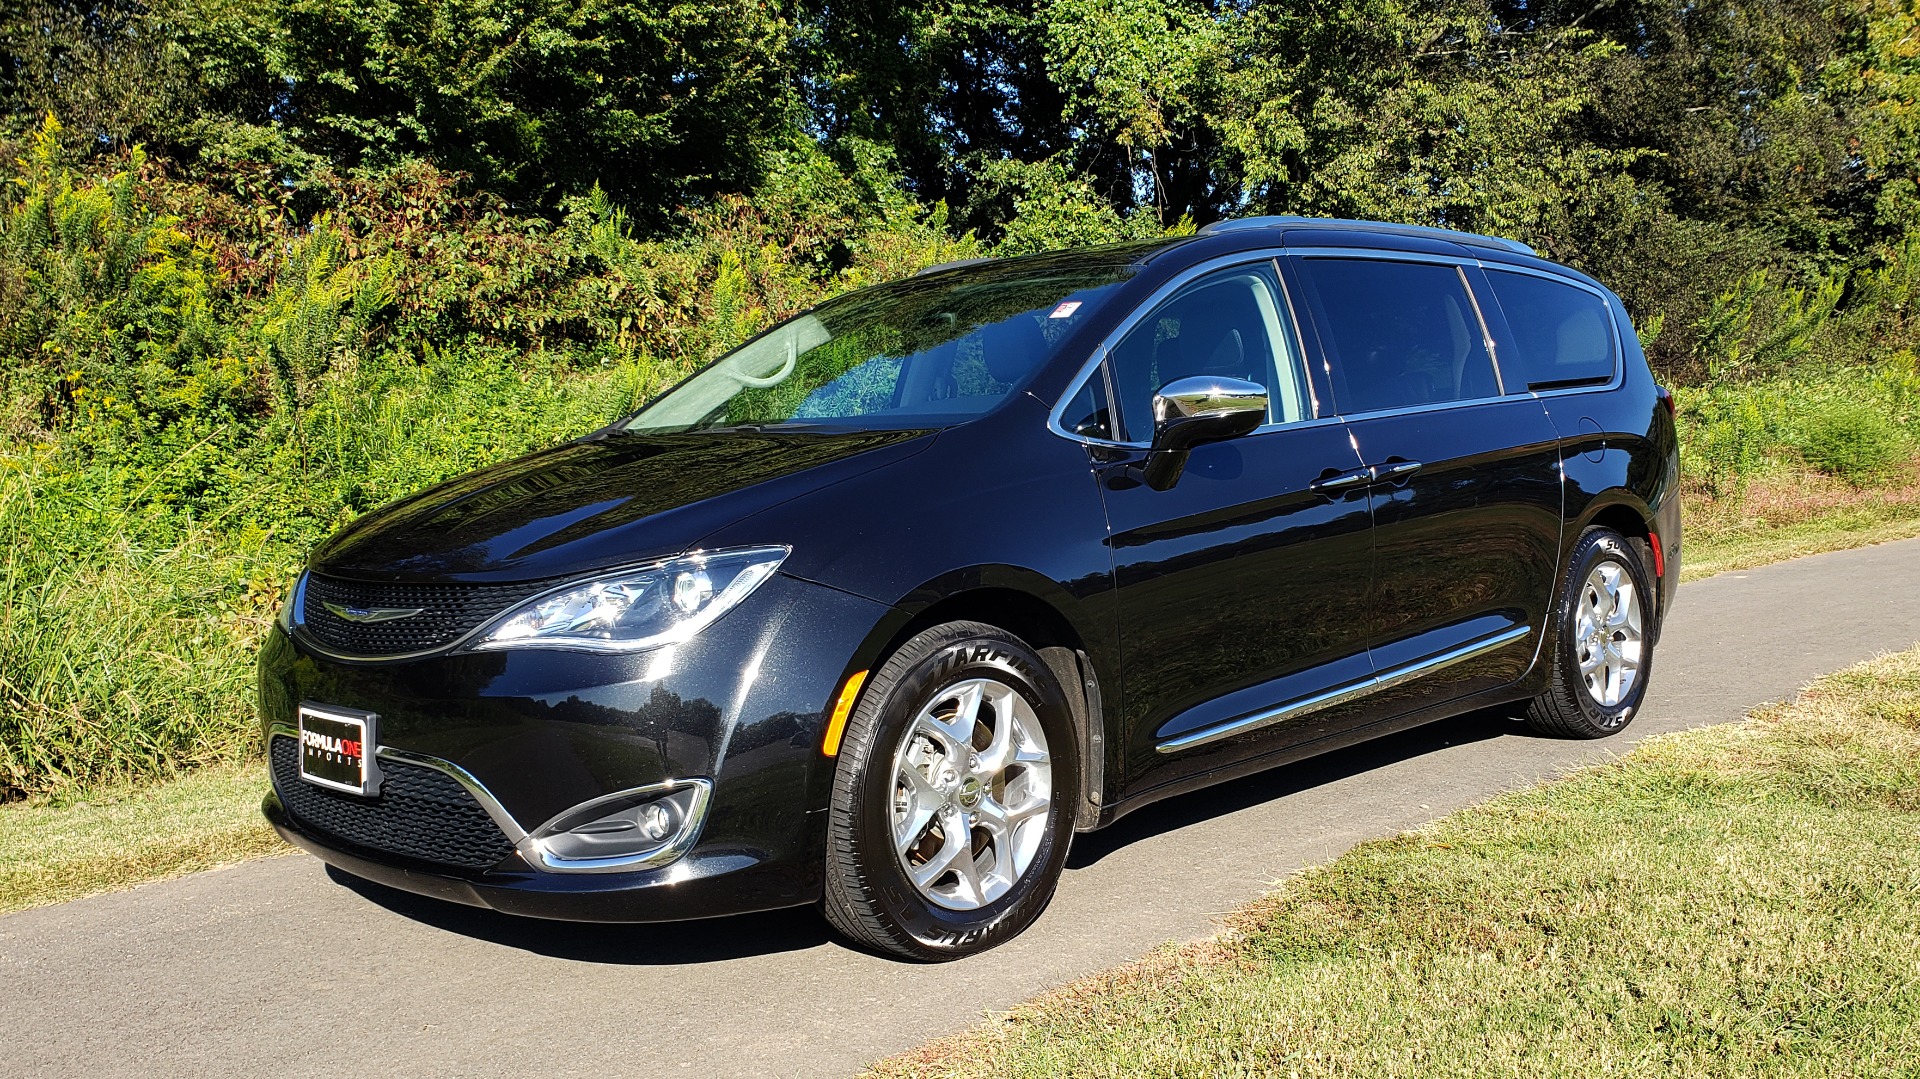 Used 2018 Chrysler PACIFICA LIMITED / 3.6L V6 / NAV / PANO-ROOF / 3-ROWS / REARVIEW for sale Sold at Formula Imports in Charlotte NC 28227 3